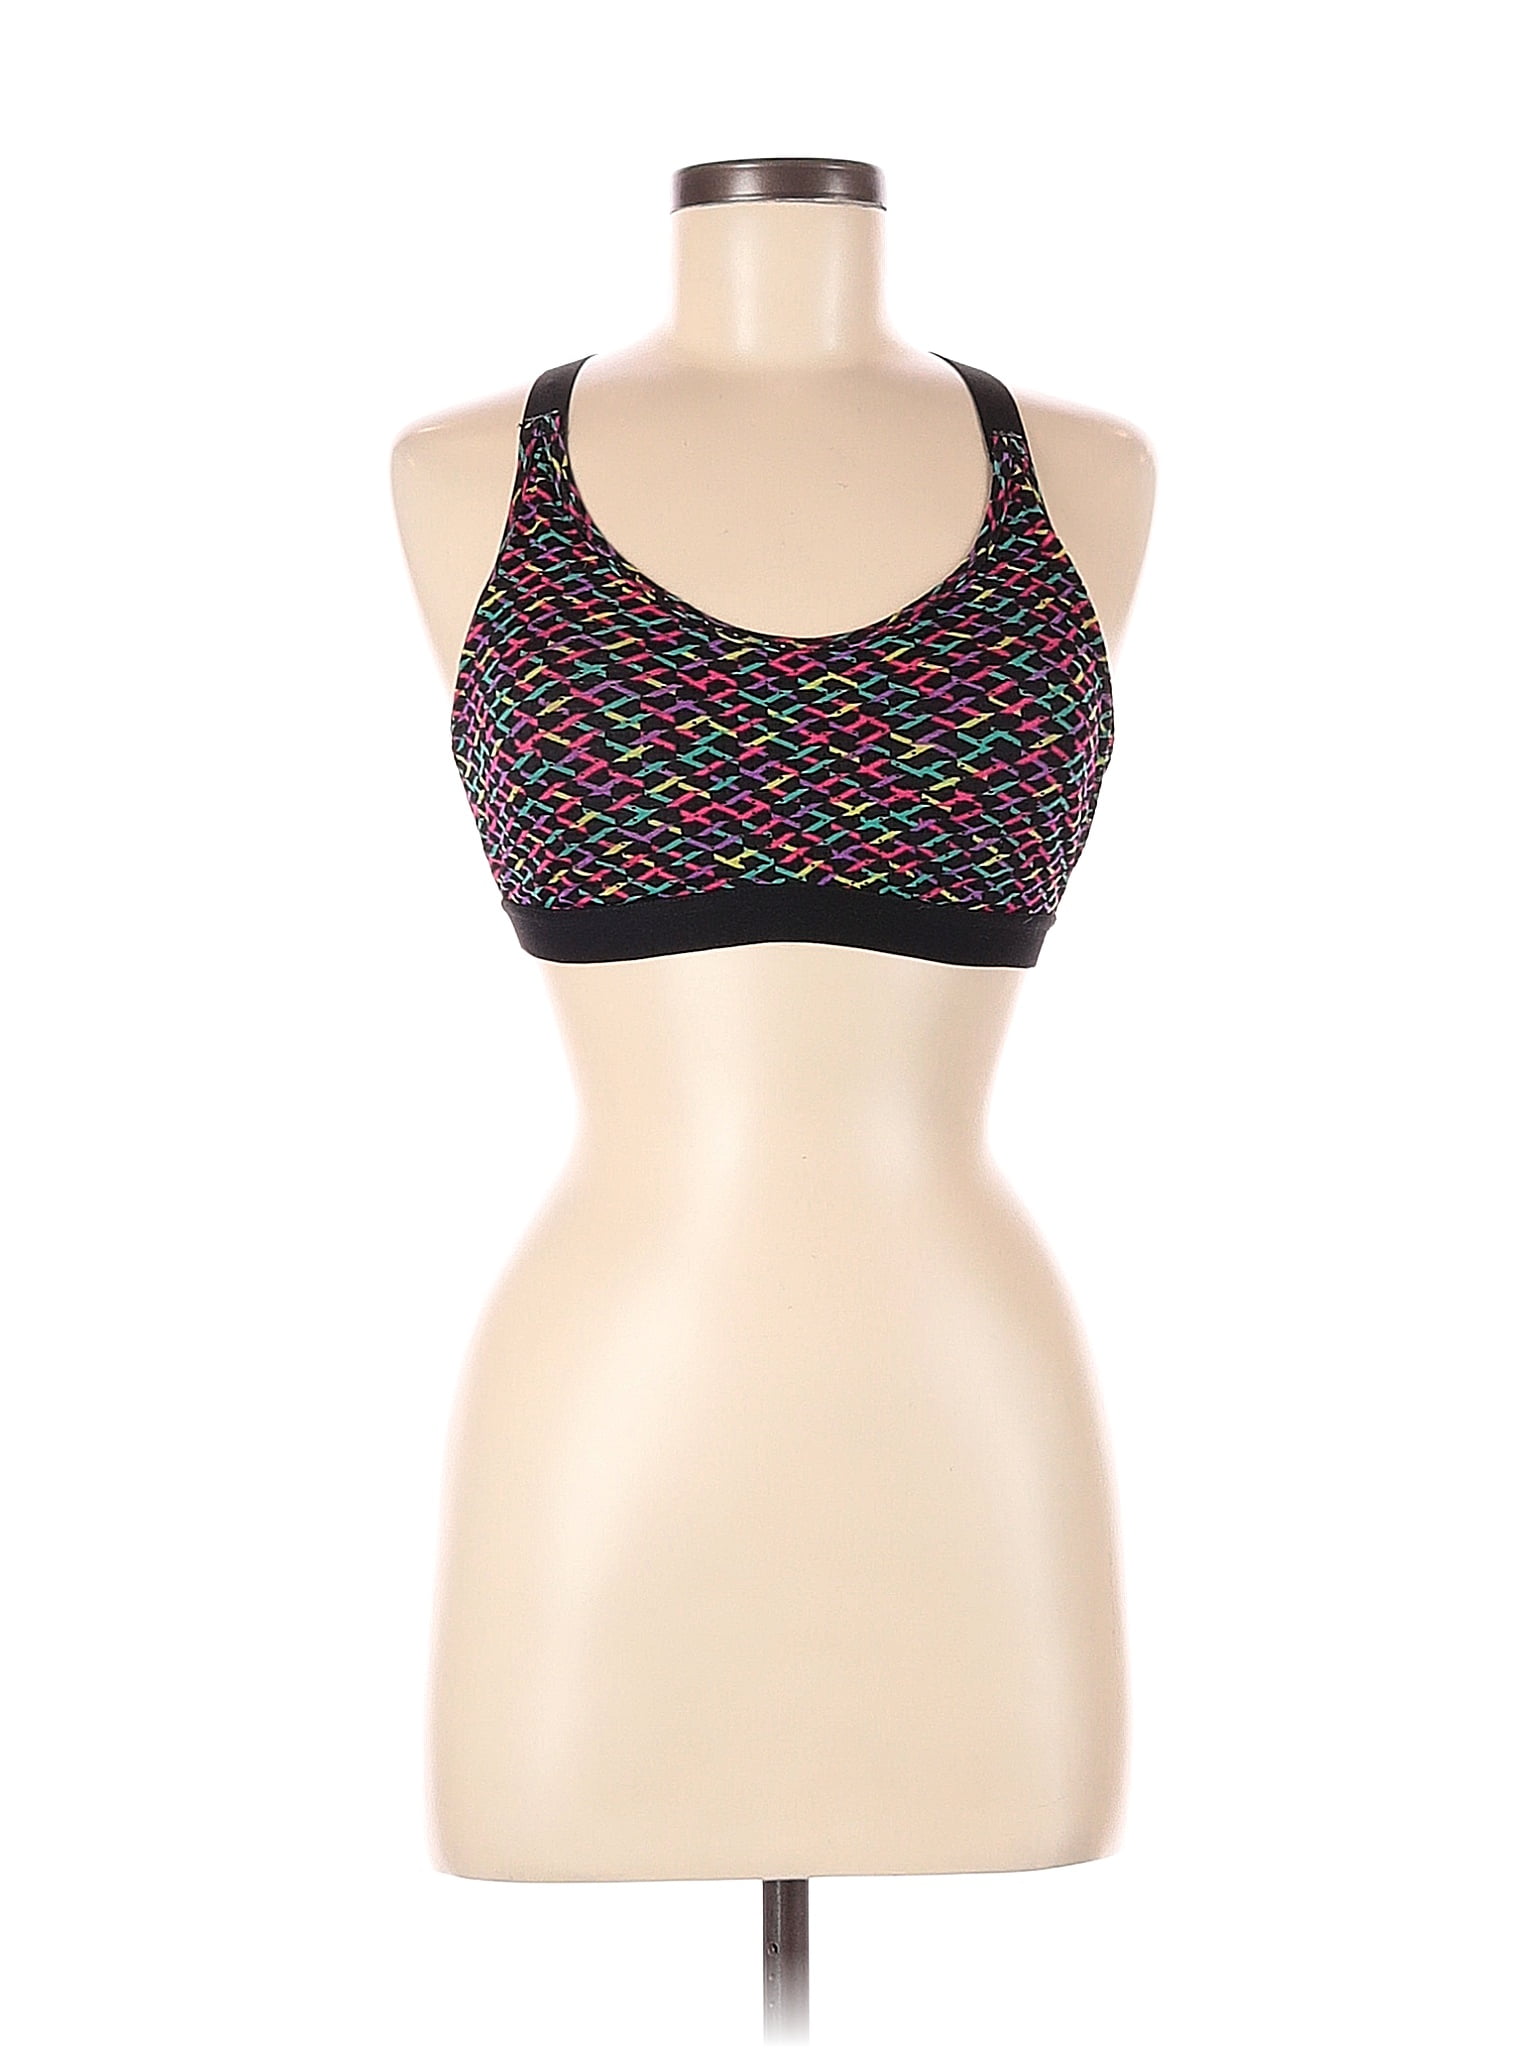 Zone Pro Women's Sports Bras On Sale Up To 90% Off Retail